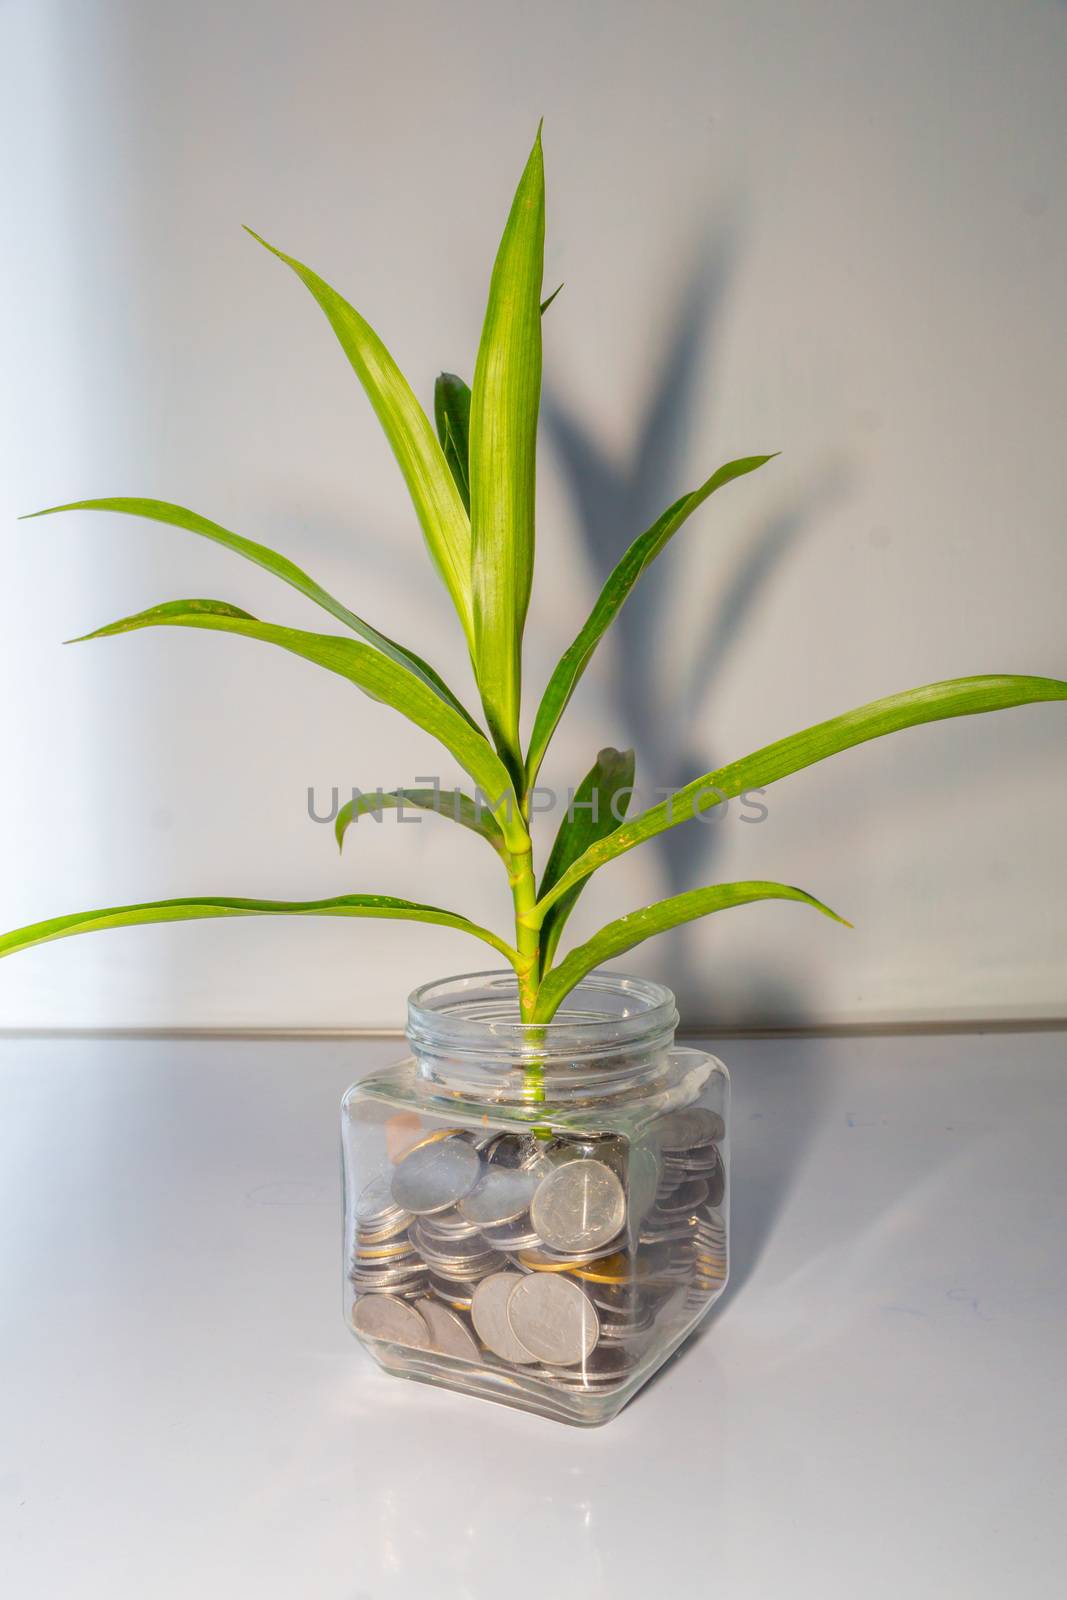 Plant growing out of coins in a glass jar. by sudiptabhowmick